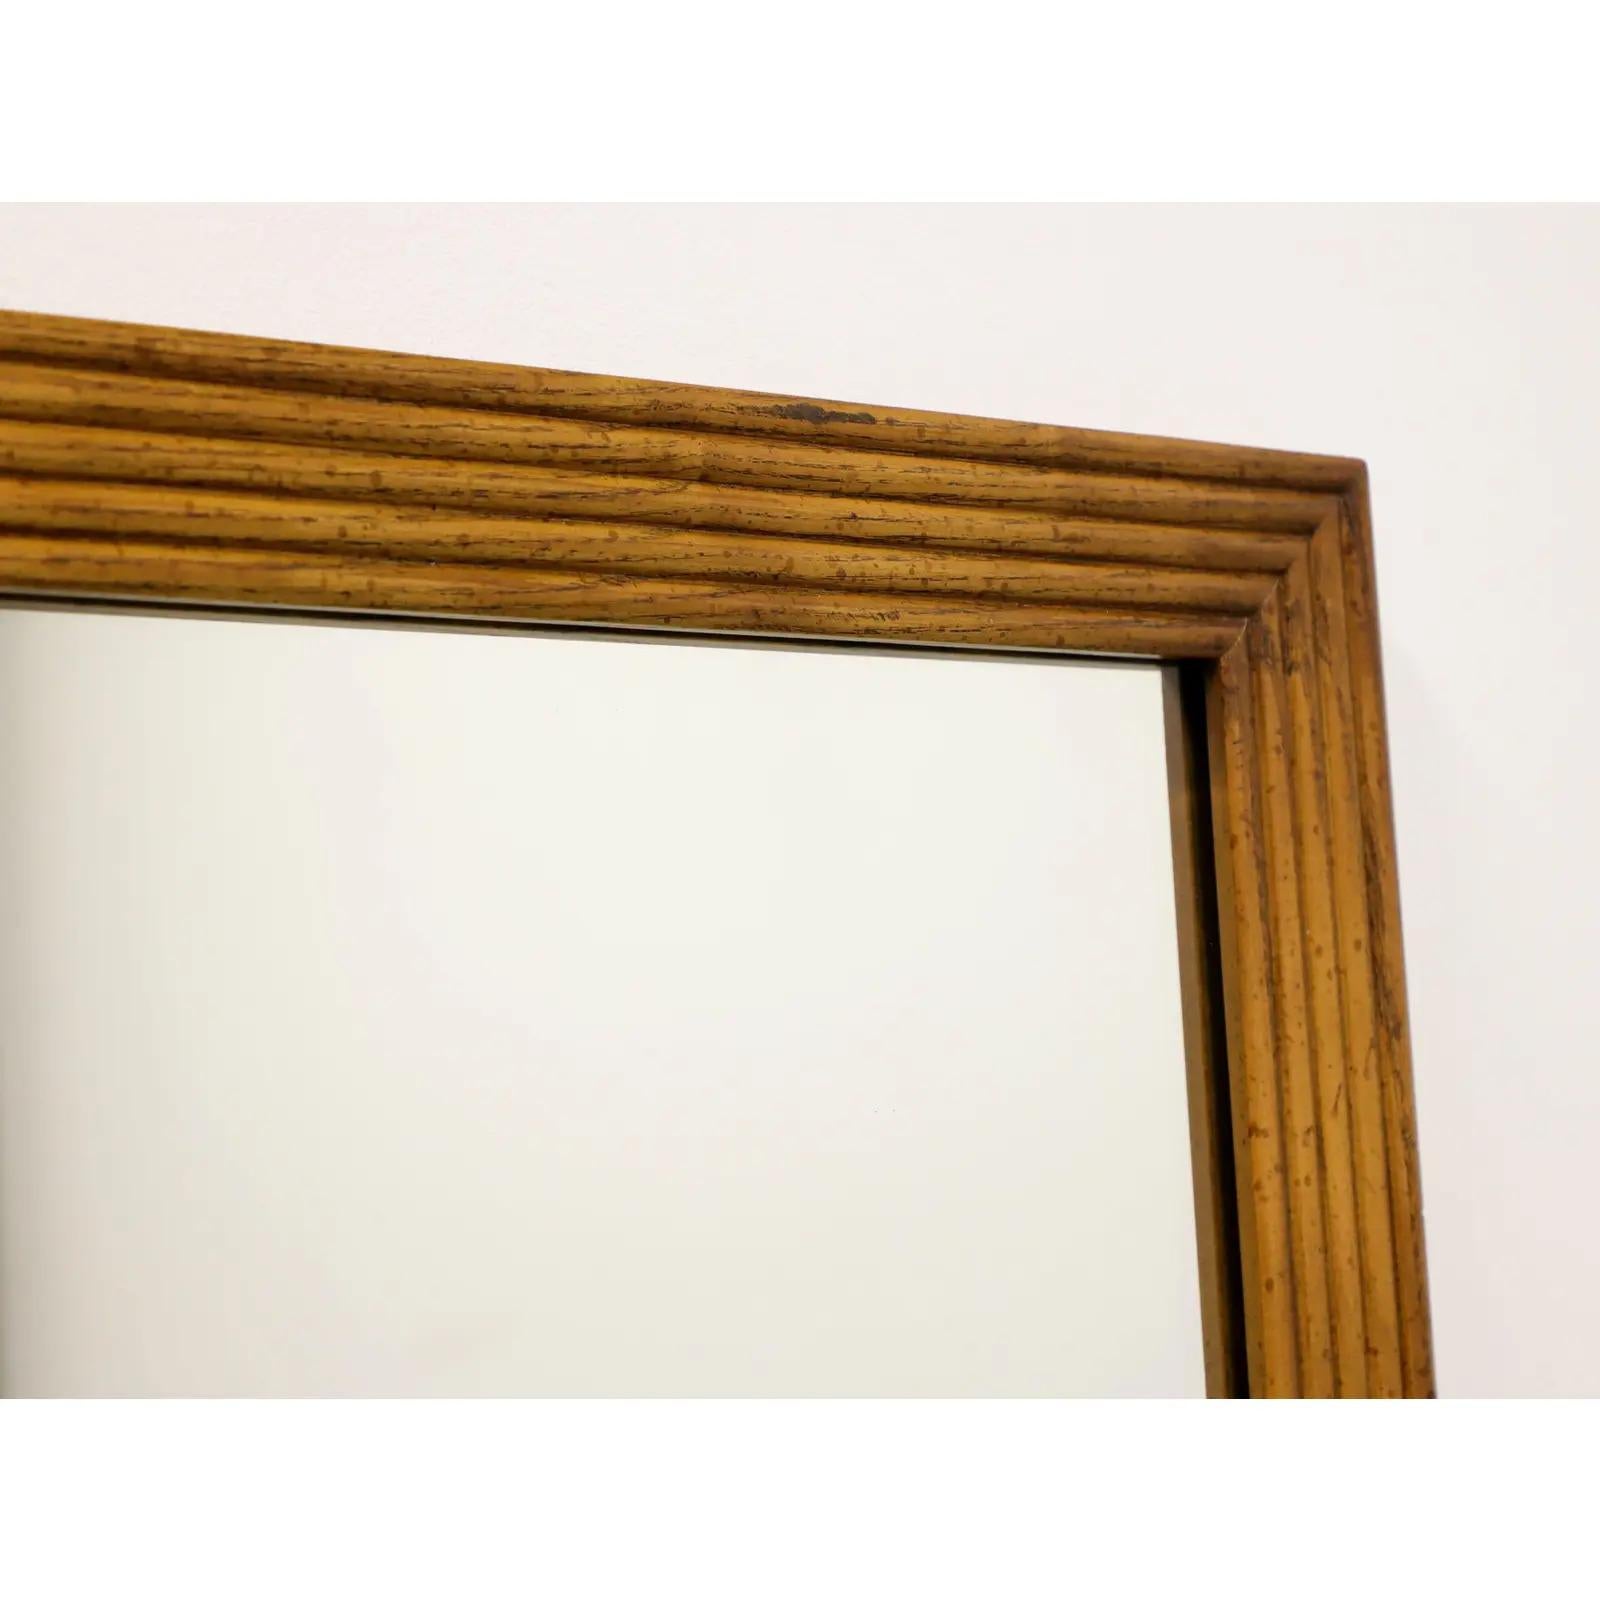 Wonderful and fine pair of Henredon wall mirror in ribbed oak. These have factory mounted wall brackets & steel-wires for easy instillation. Condition is great. No issues.